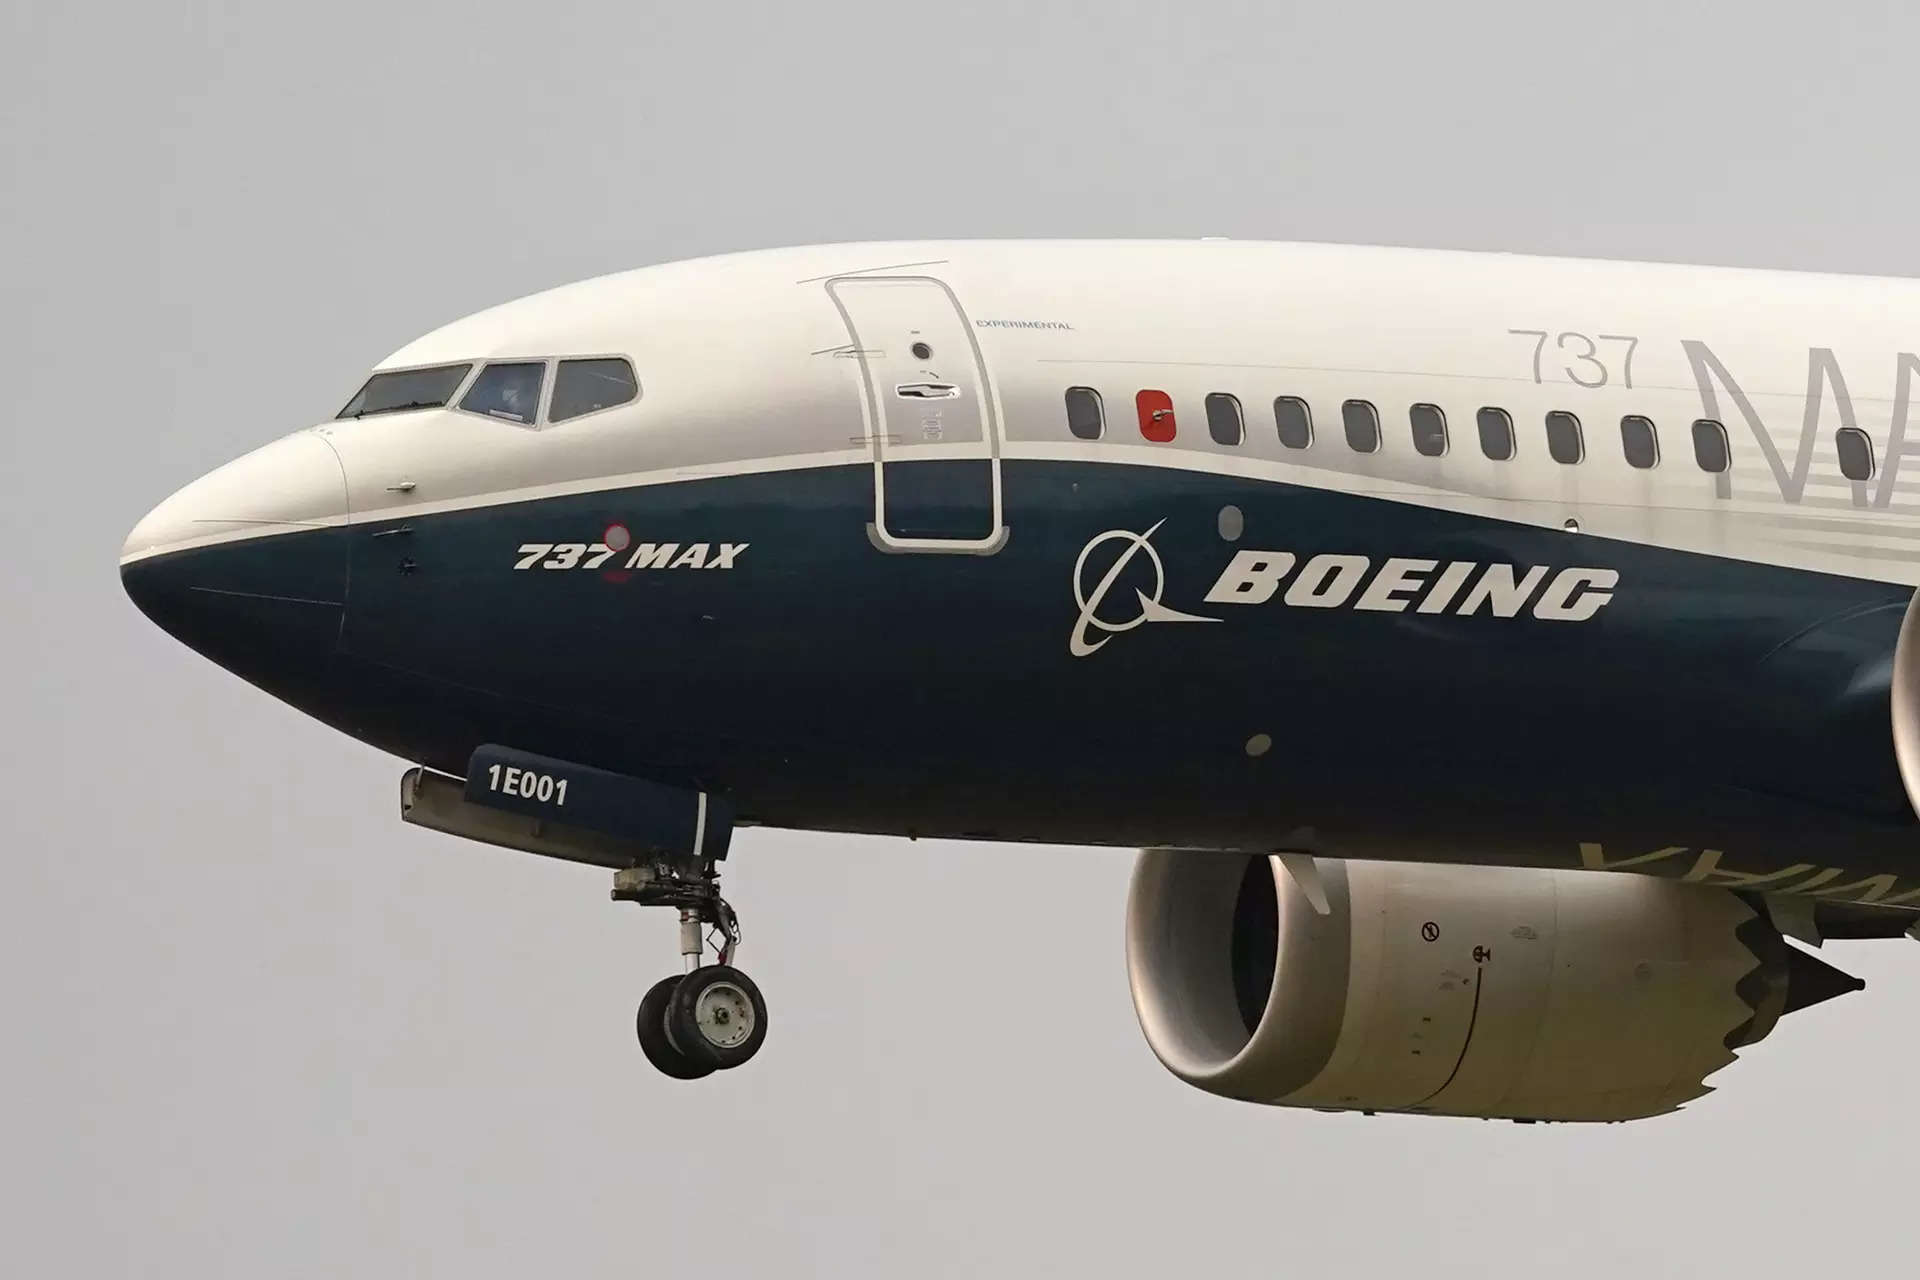 Boeing 737 Max: The troubled history of fatal crashes and 346 deaths in 7 years 